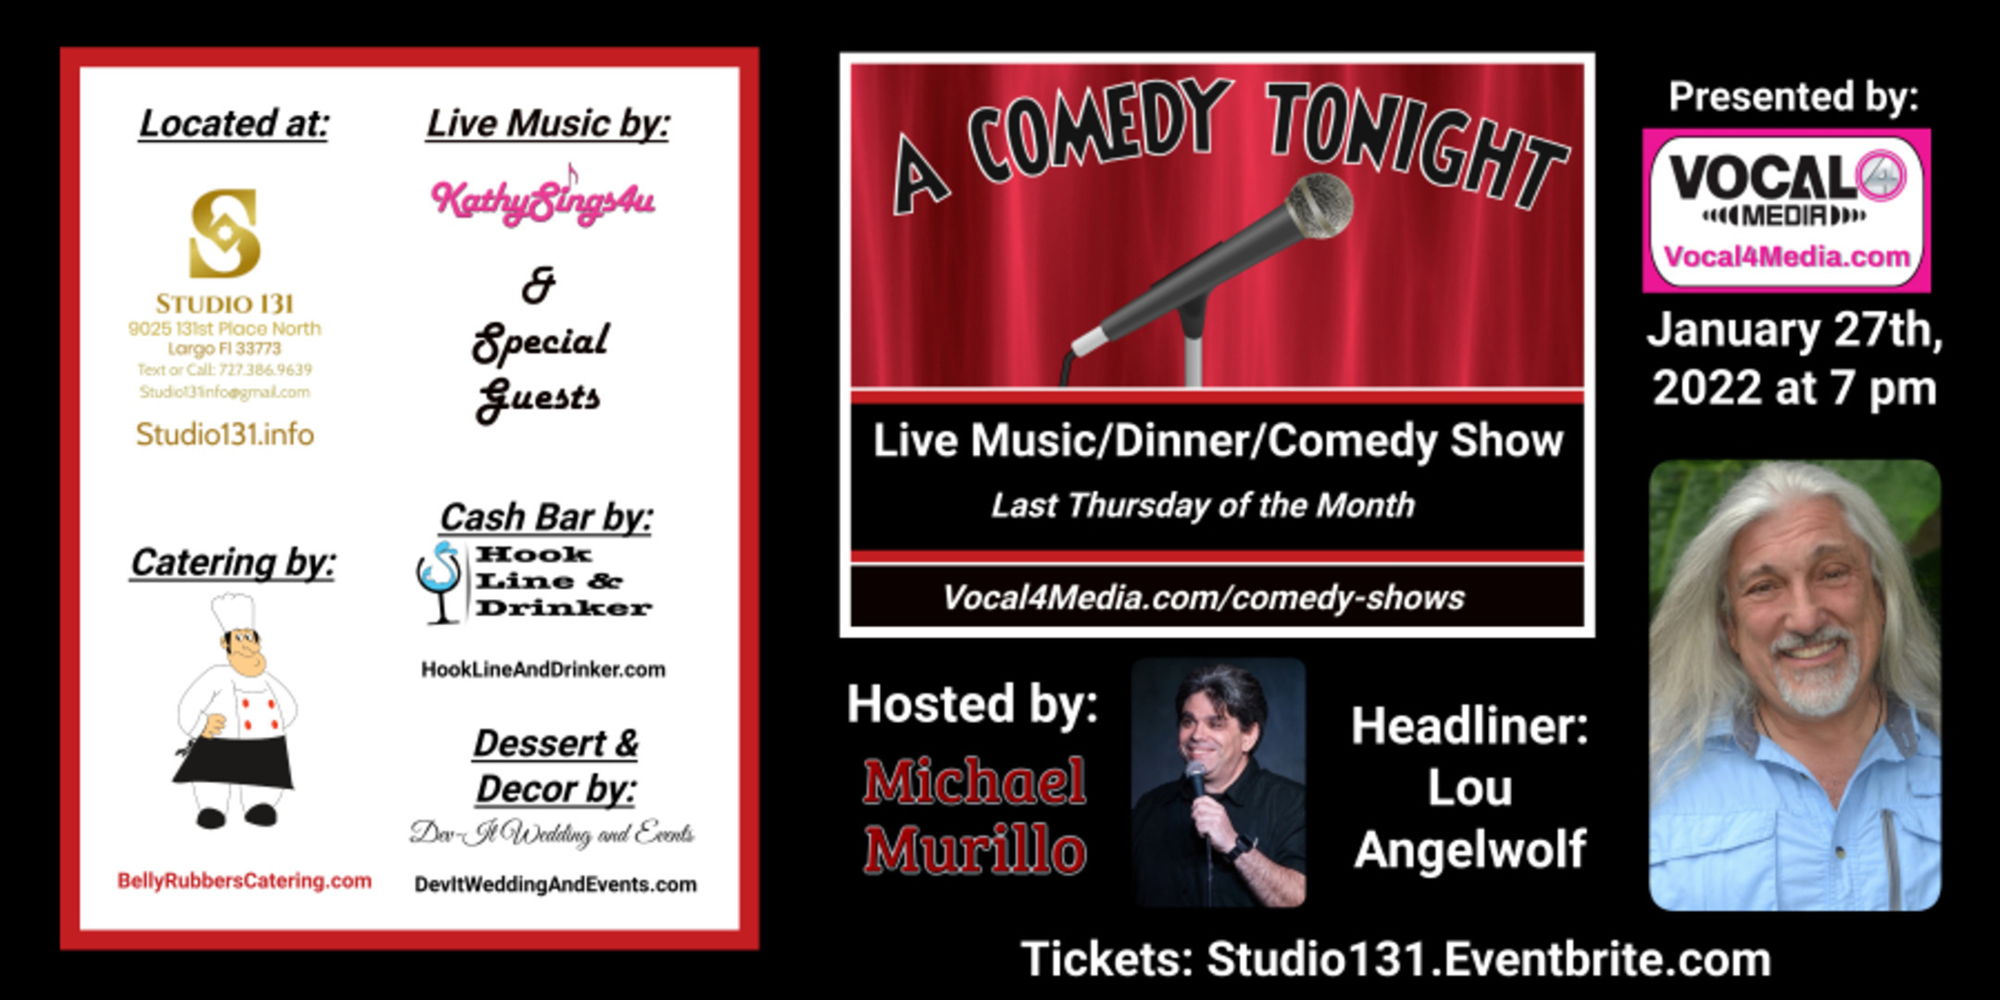 A Comedy Tonight with Lou Angelwolf and Host Michael Murillo promotional image